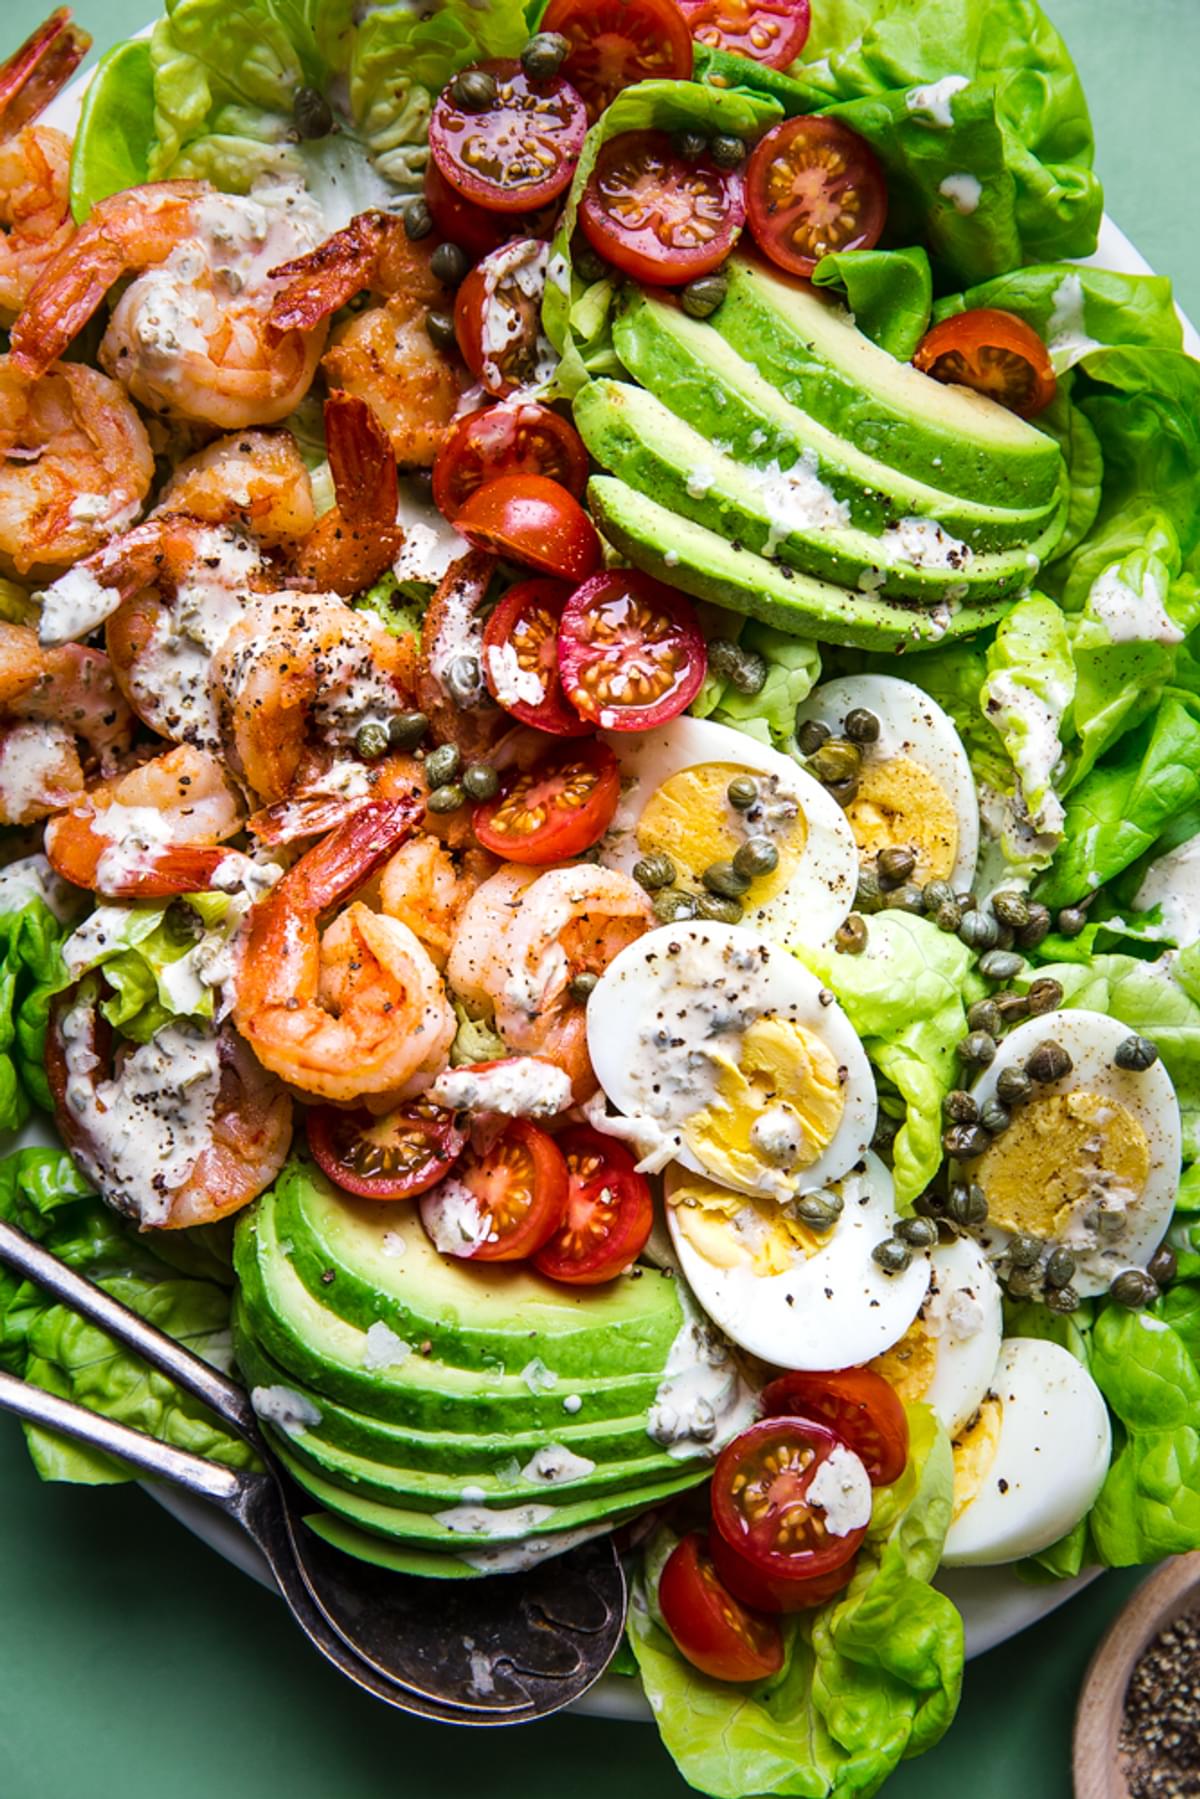 Shrimp Louie salad on a plater with avocado, romaine lettuce, hard boiled eggs, tomatoes, capers